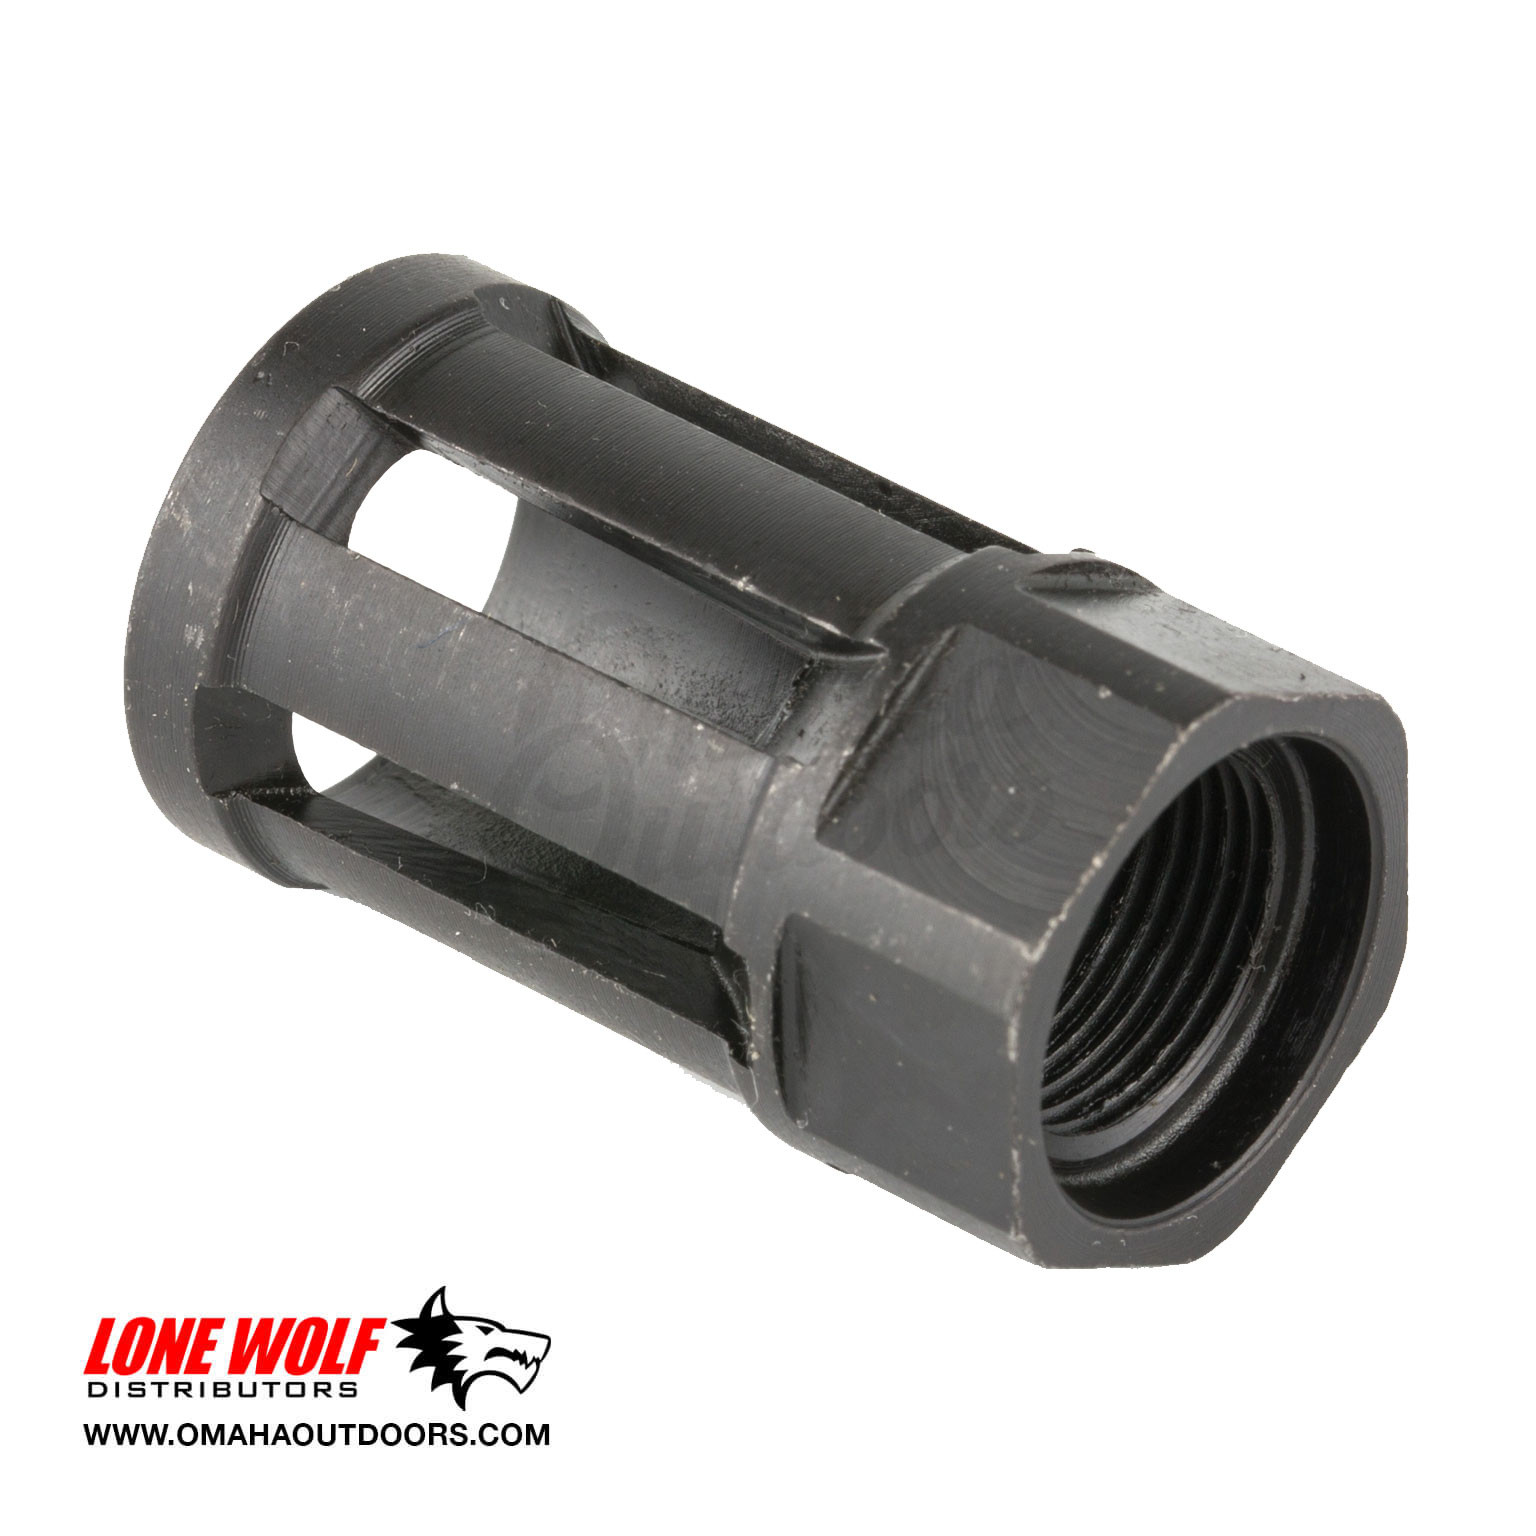 Lone Wolf Flash Hider 9mm 1/2x28 - In Stock